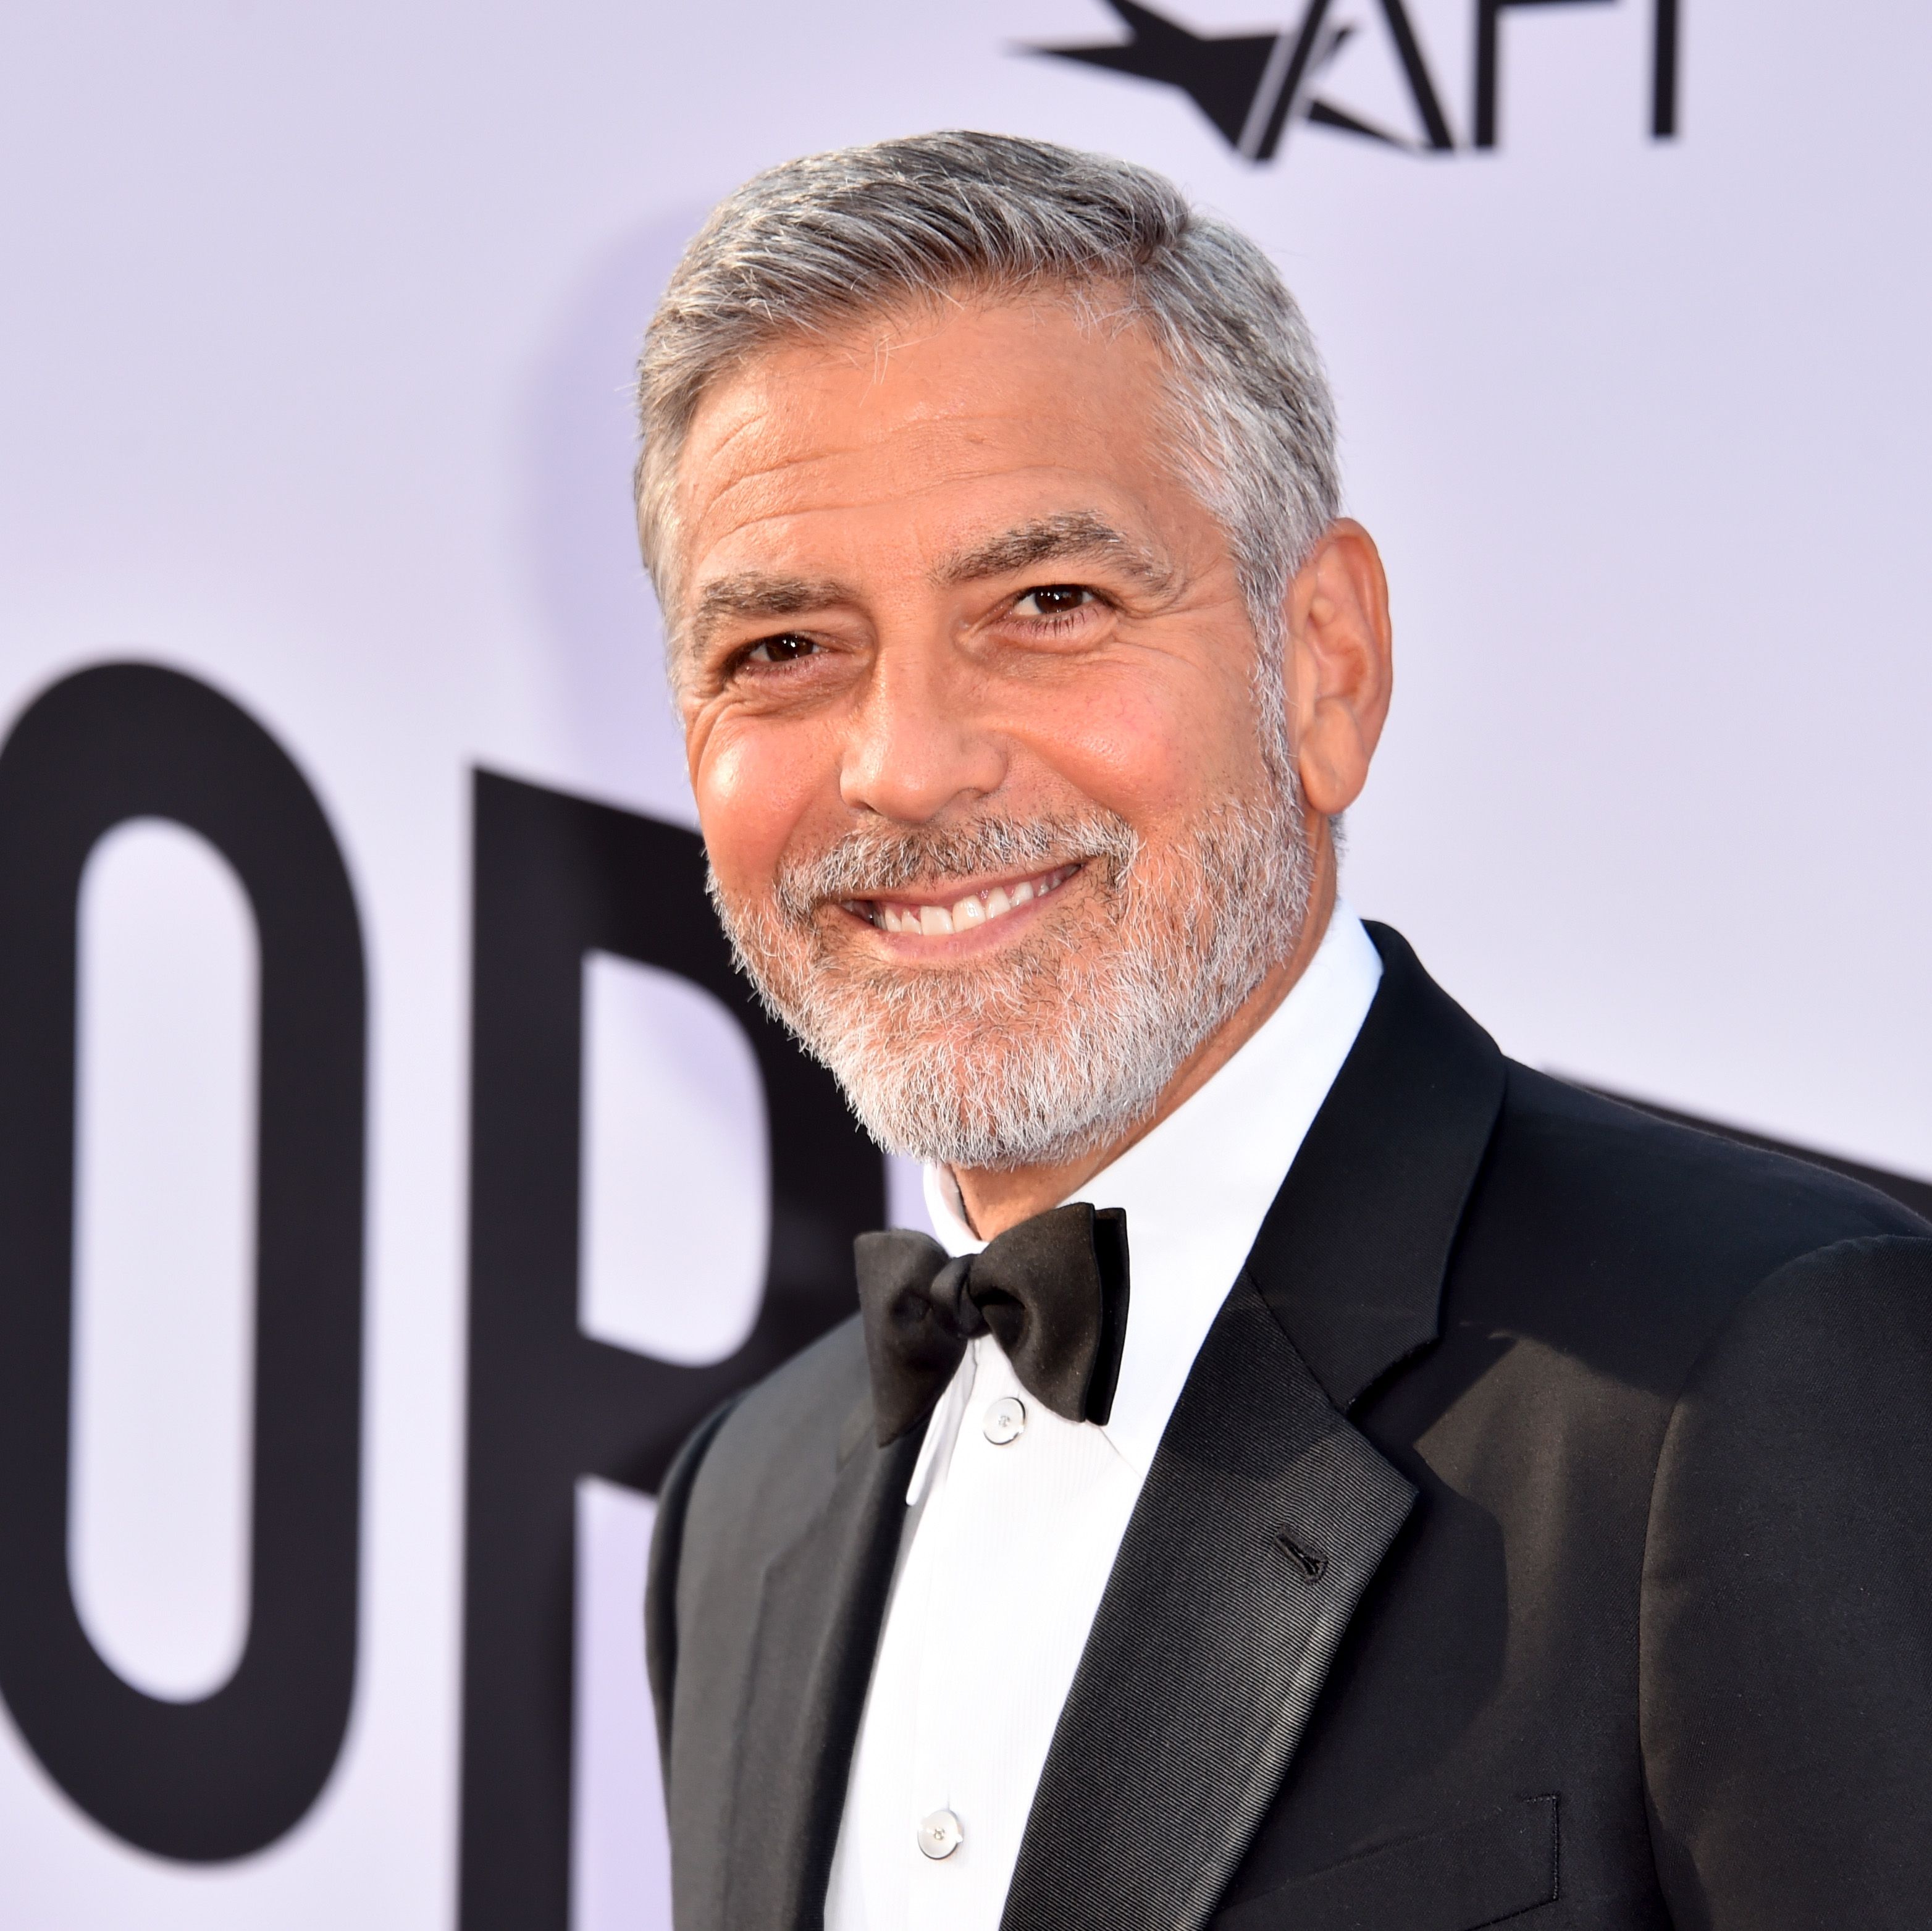 George Clooney Once Turned Down $35 Million for a Single Day of Work